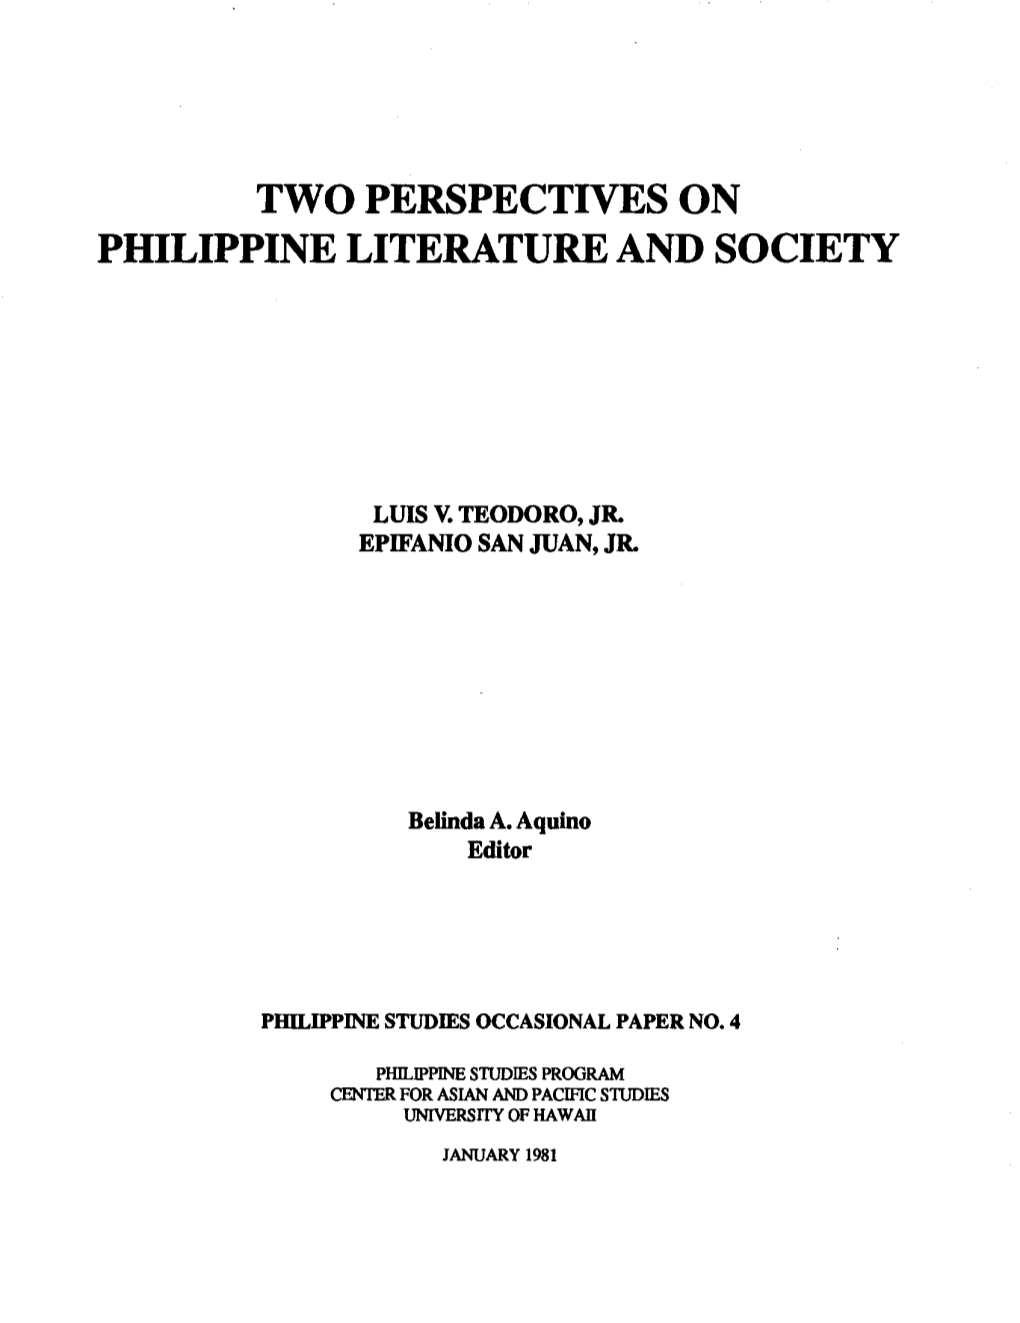 Two Perspectives on Pidlippine Literature and Society